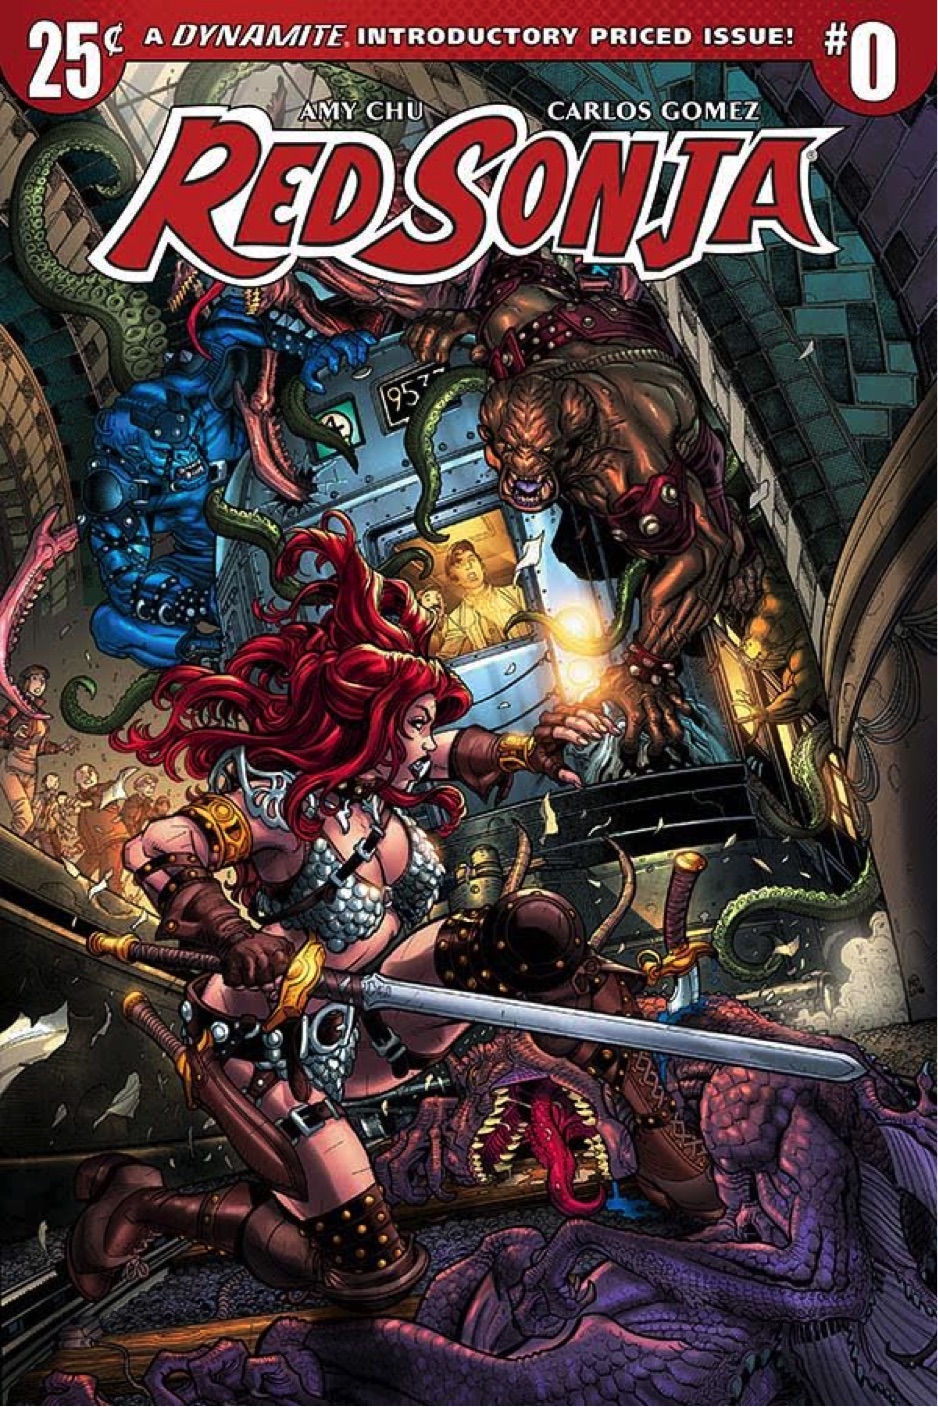 Red Sonja #0 Review